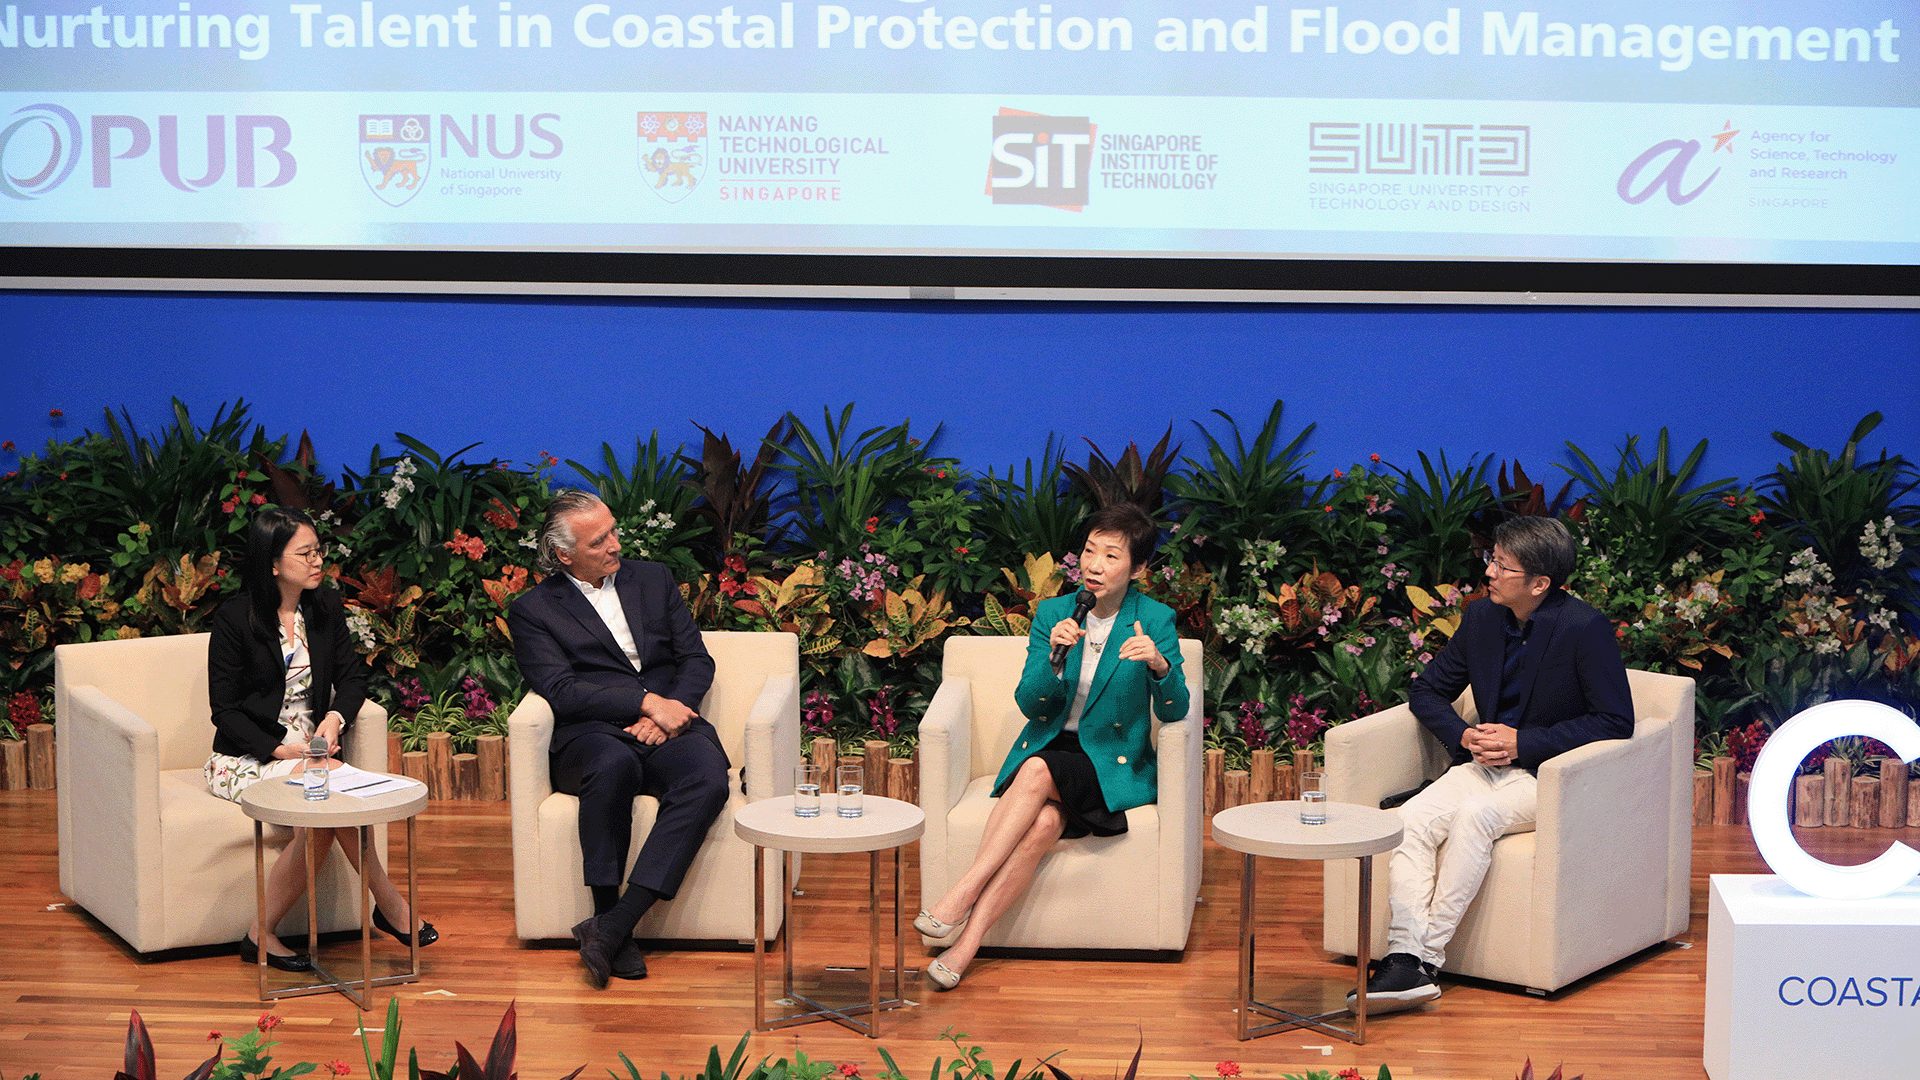 Minister Grace Fu took part in a panel discussion  on innovative approaches to coastal protection and flood resilience.